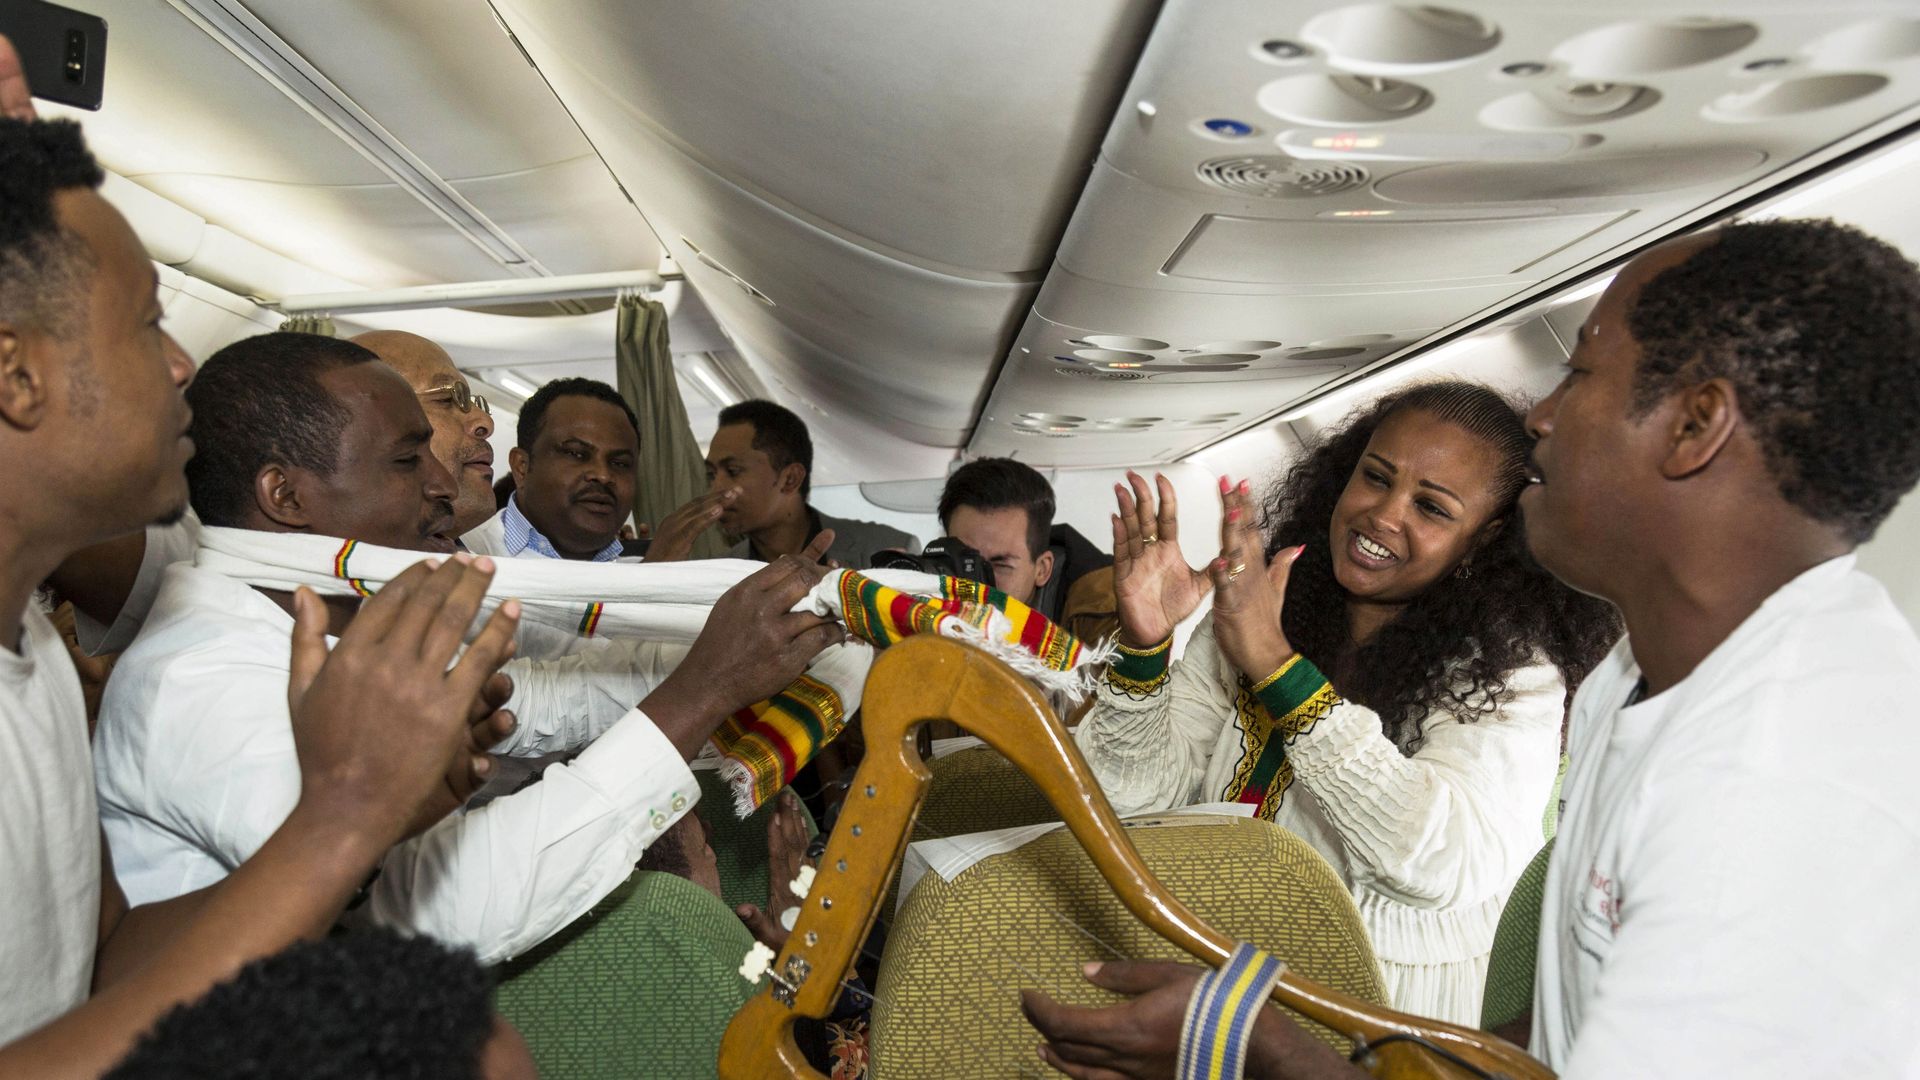 Passengers sing and dance during the first flight between the Ethiopian capital Addis Ababa and the Eritrean capital Asmara in twenty years. Photo: Michael Tewelde/AFP/Getty Images